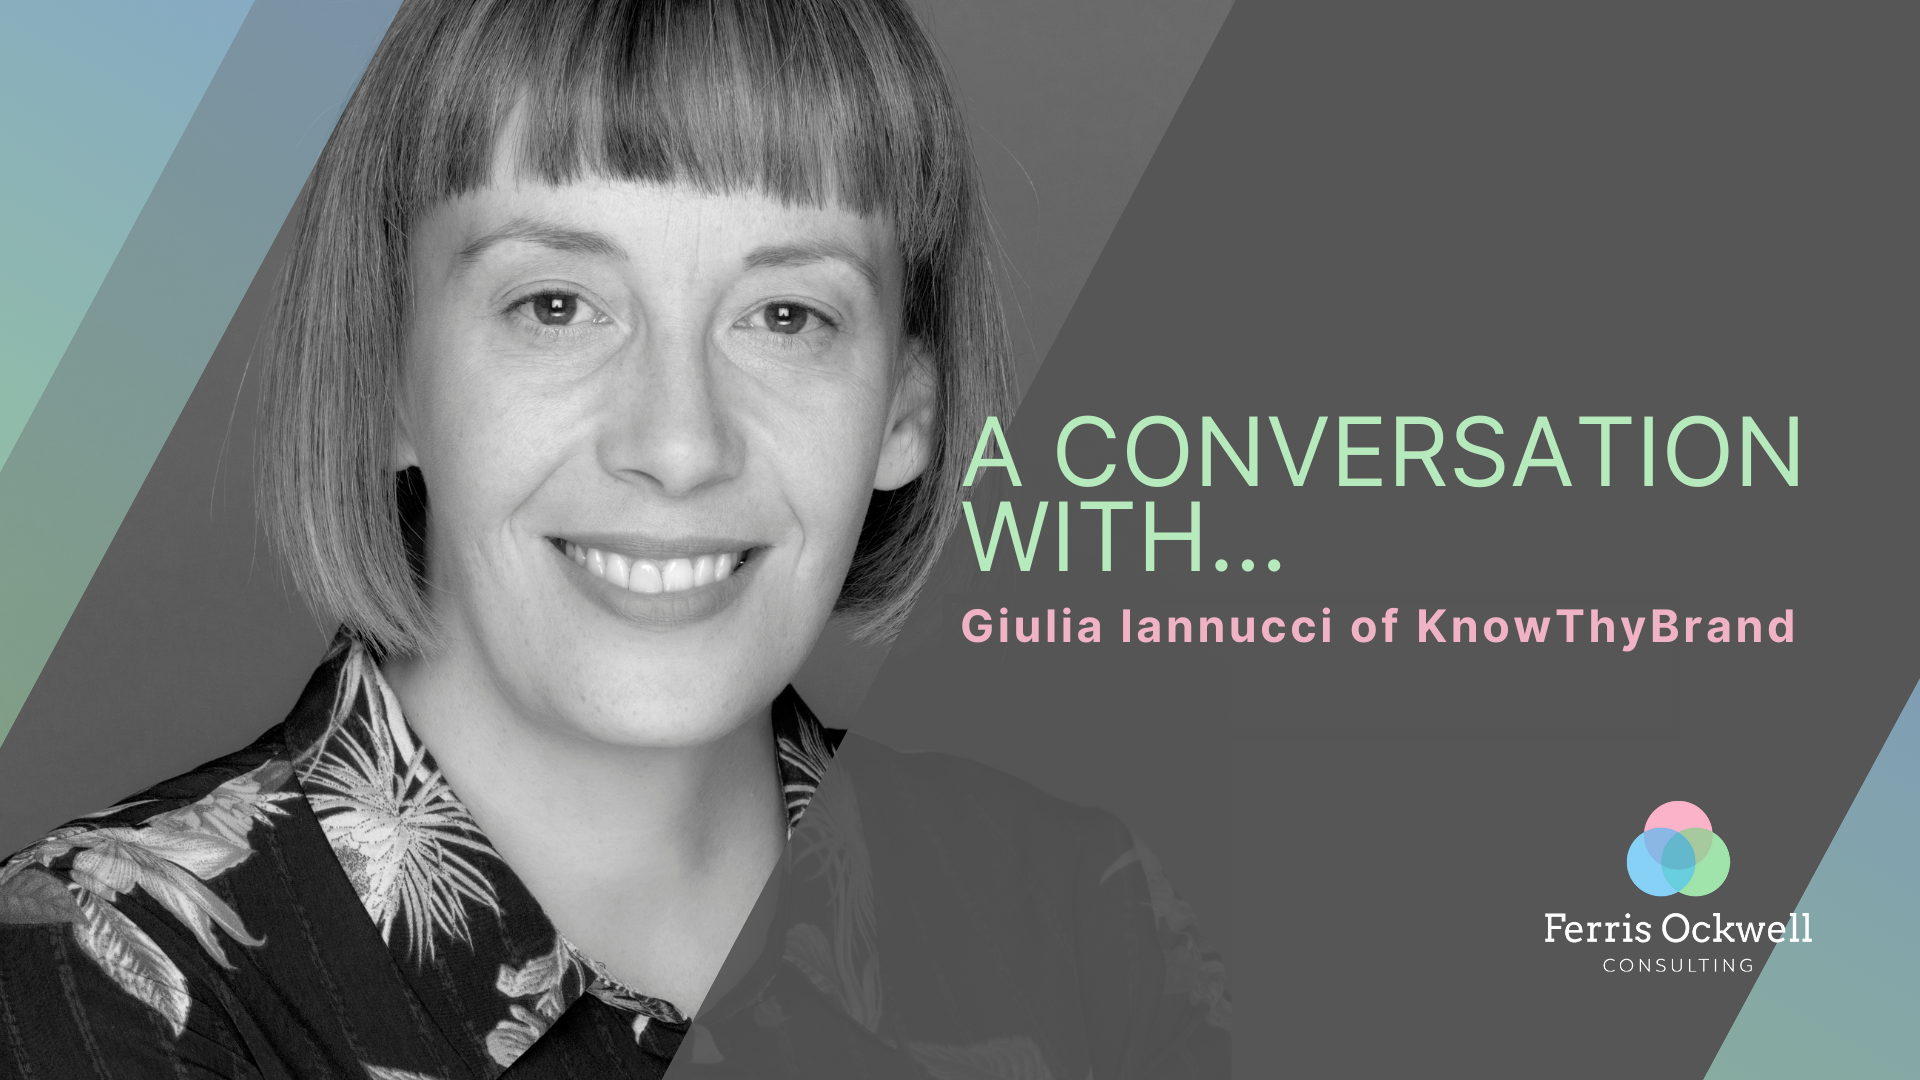 Impact Leadership: A Conversation with Giulia Iannucci of KnowThyBrand - Ferris Ockwell Consulting